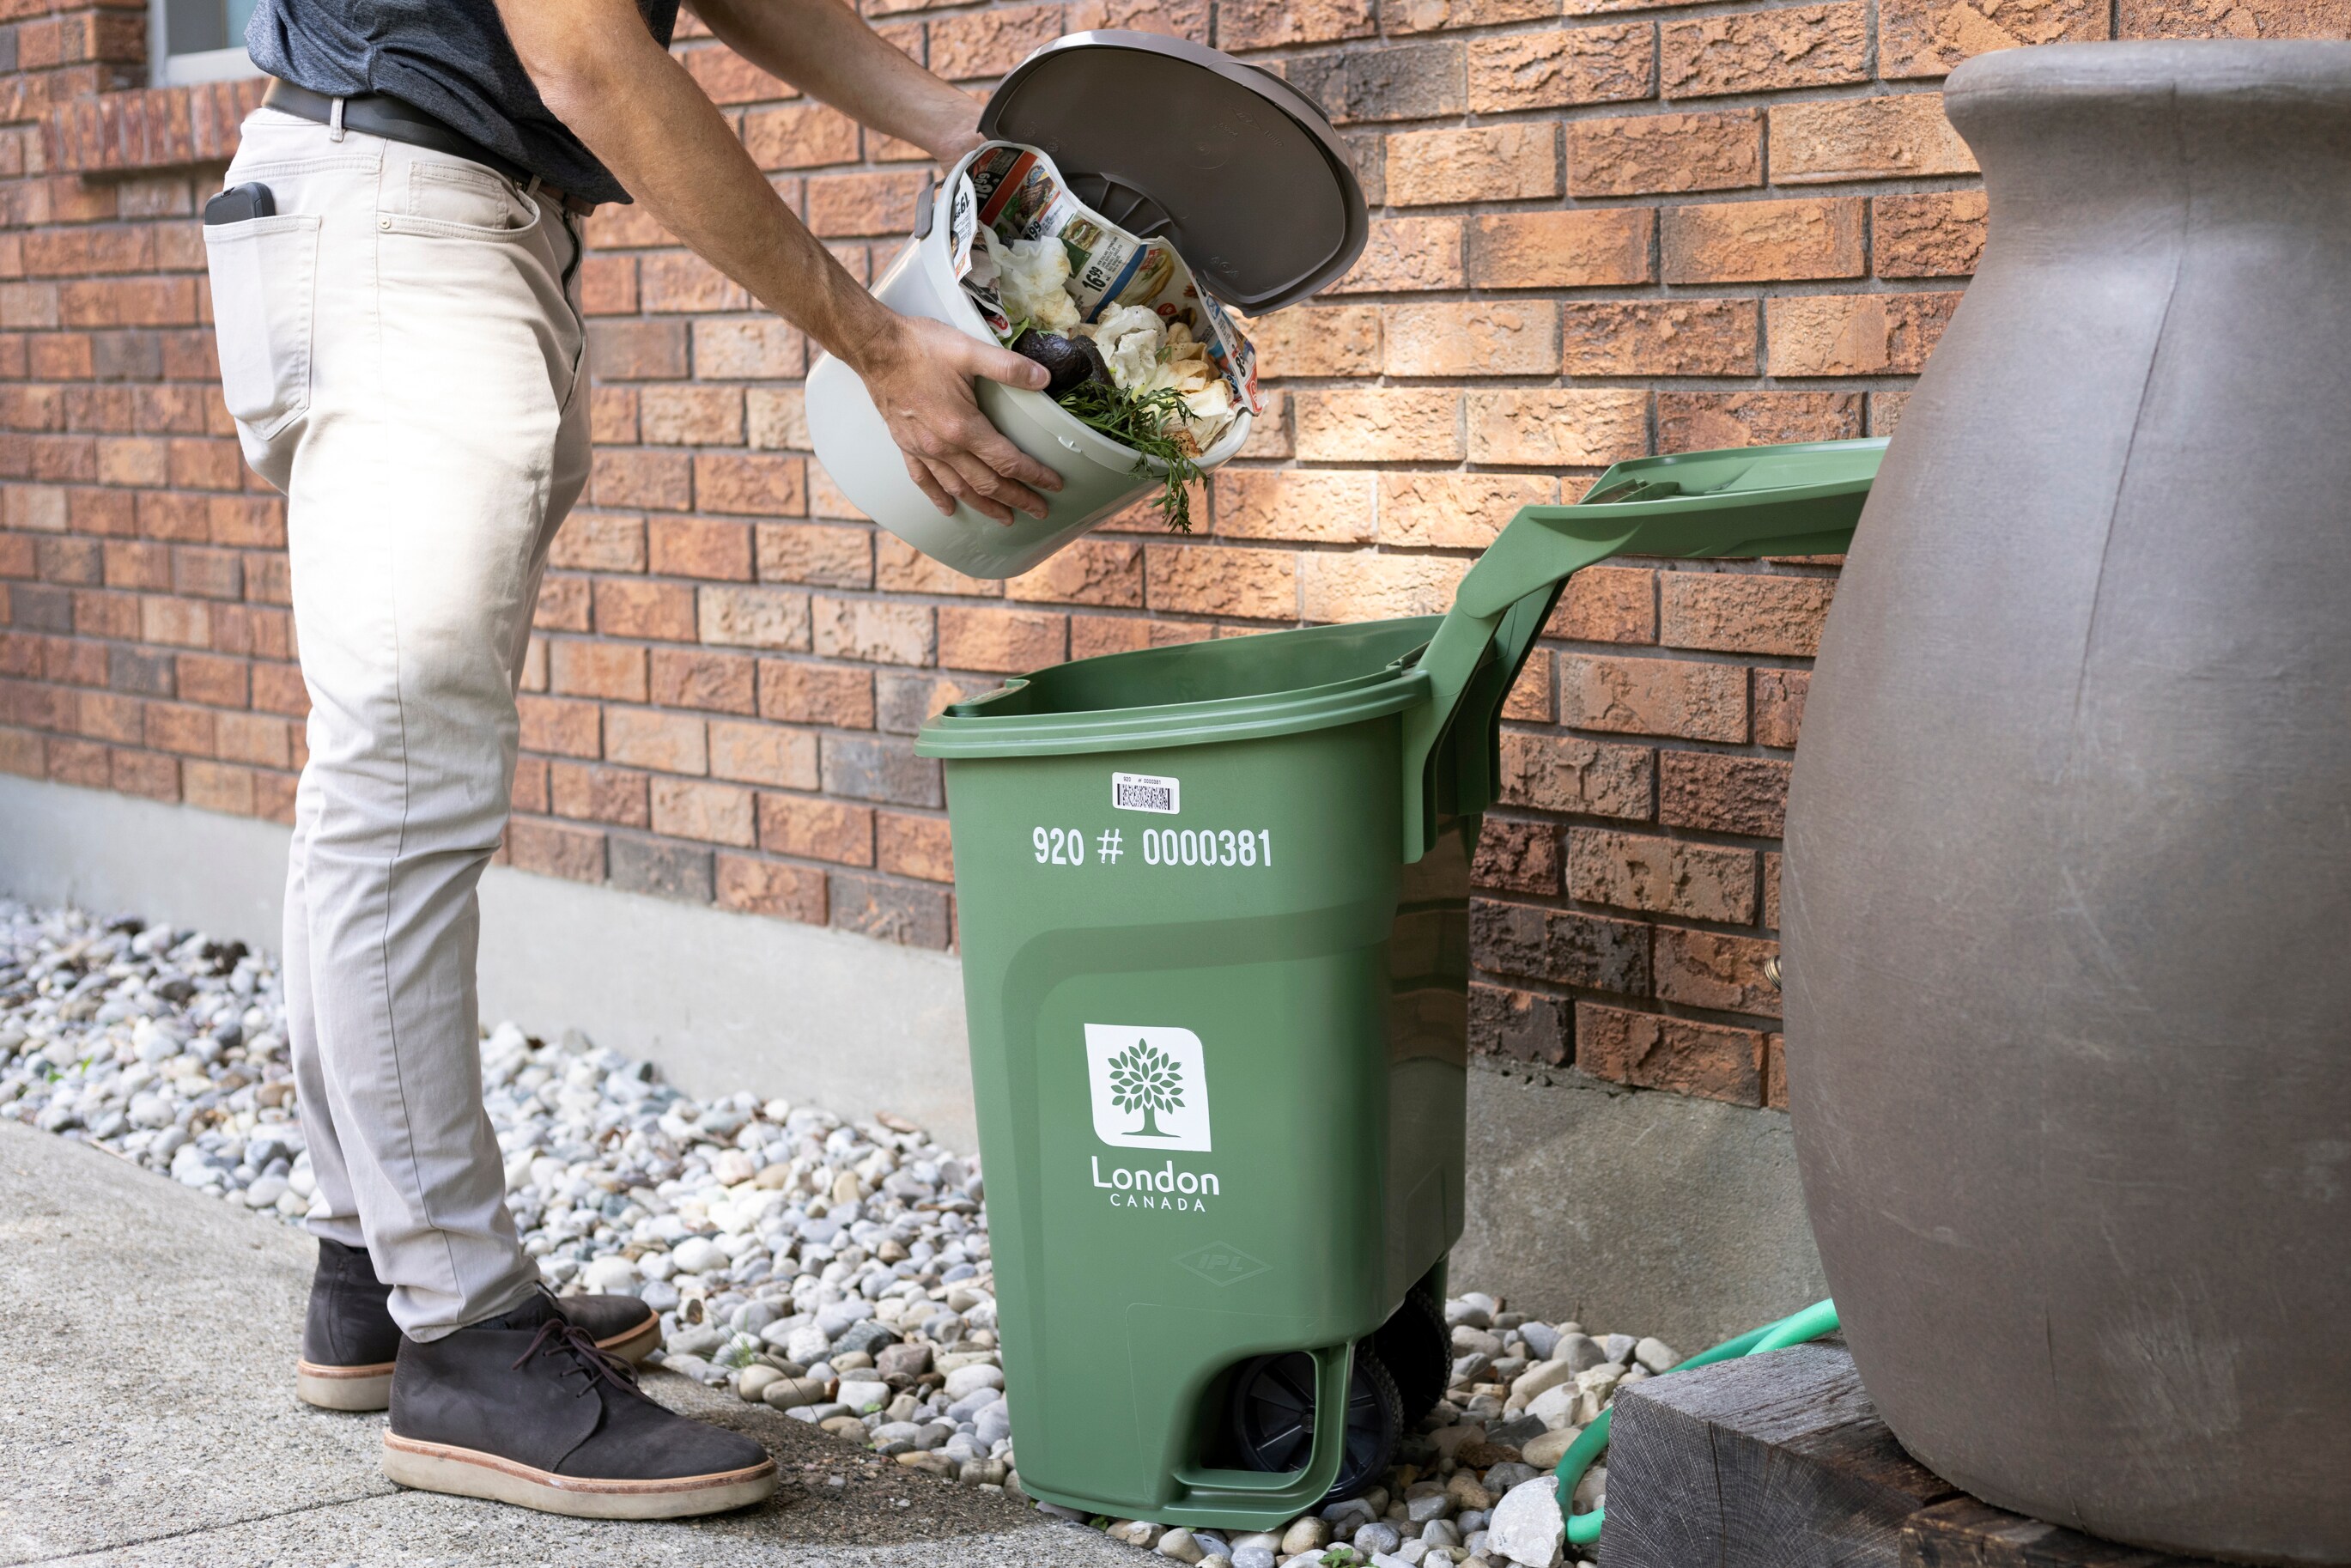  A man empties the materials from a Kitchen Container into an open Green Bin. 